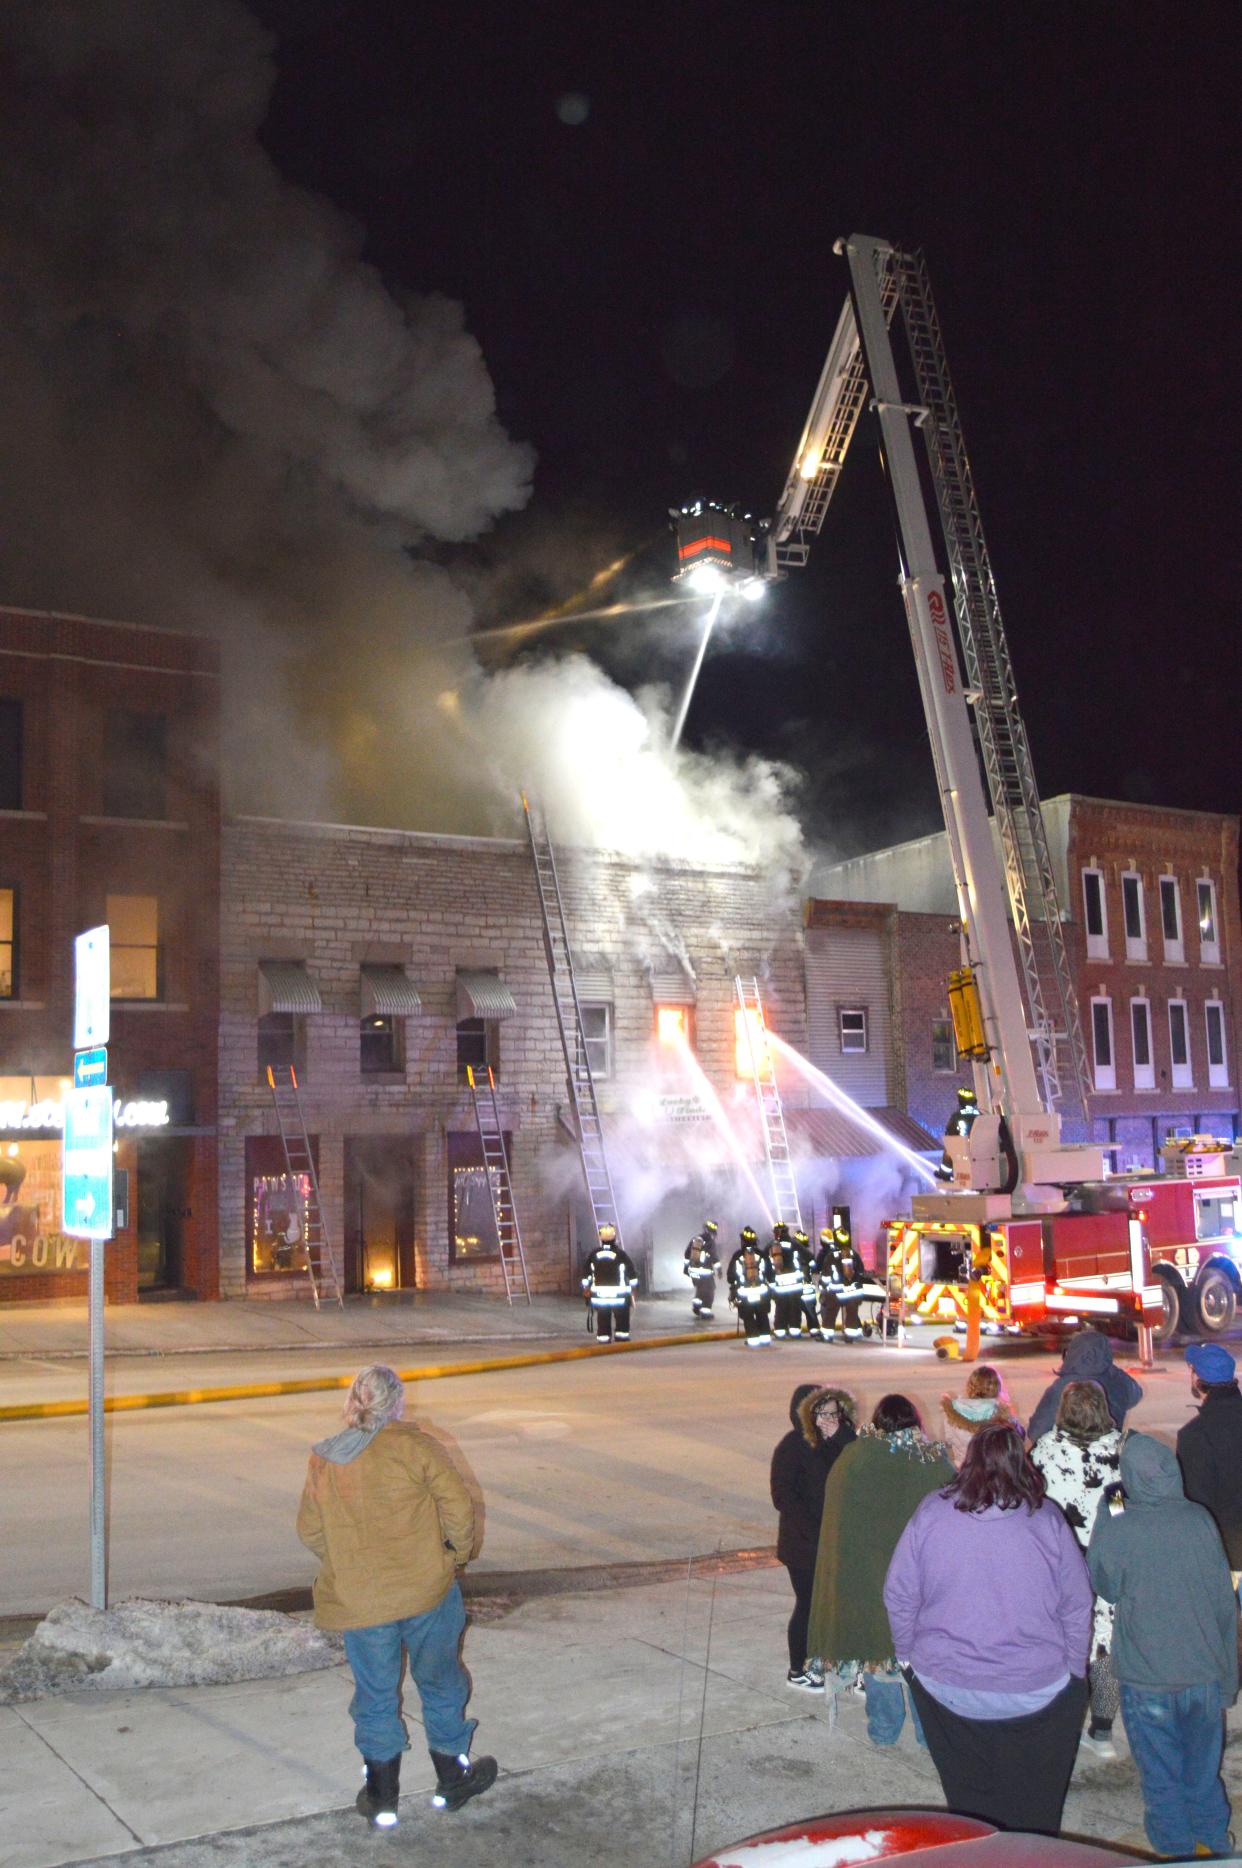 Firefighters on Jan. 13, 2022, battle a blaze in Waukon that destroyed two businesses and endangered a family living in an upstairs apartment. The owner of one of the businesses, Mindy Jo Jones, is charged with arson.